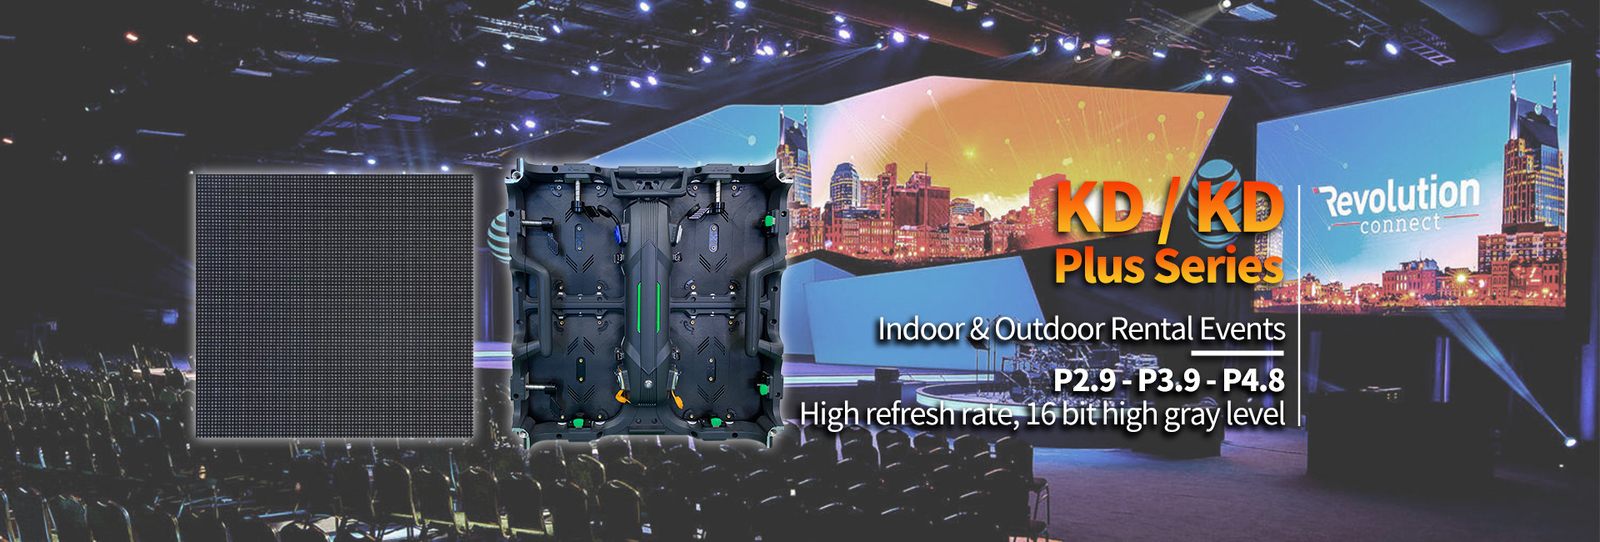 LED Stage Backdrop Screen